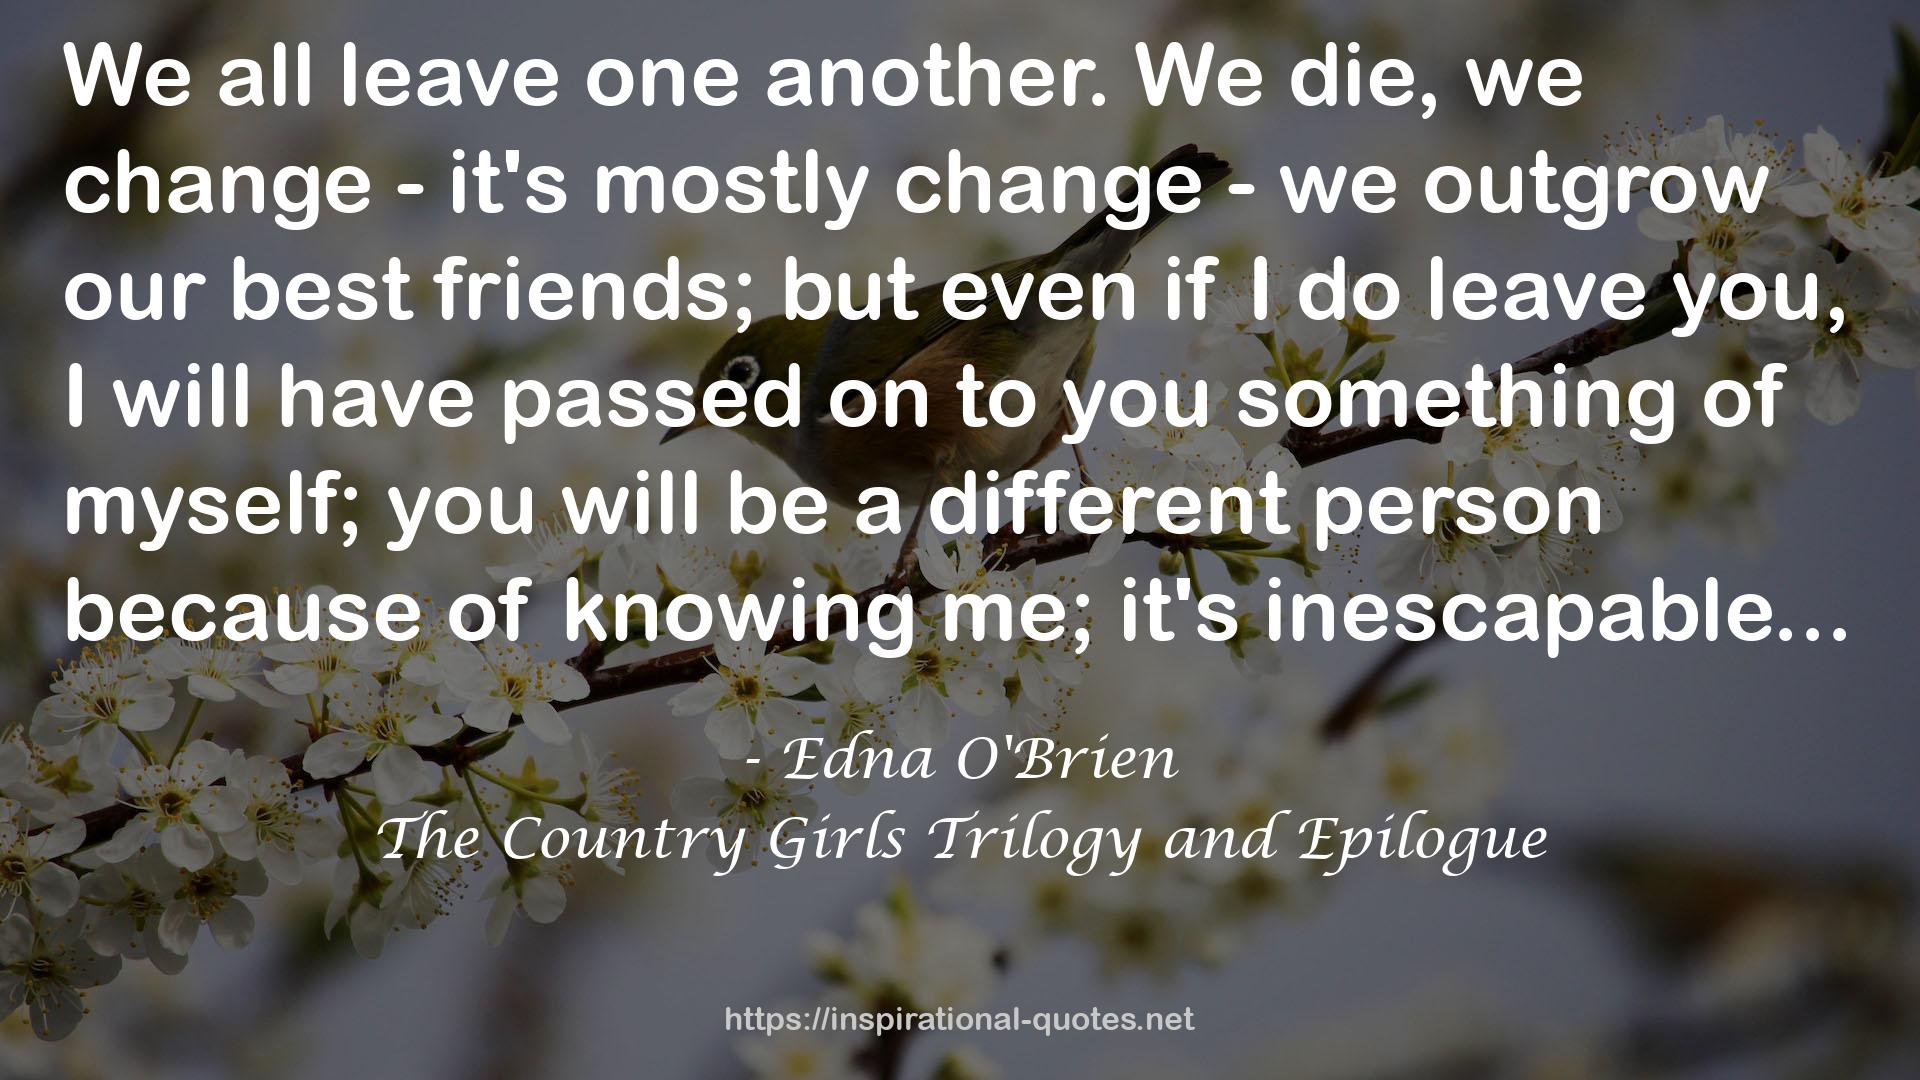 The Country Girls Trilogy and Epilogue QUOTES